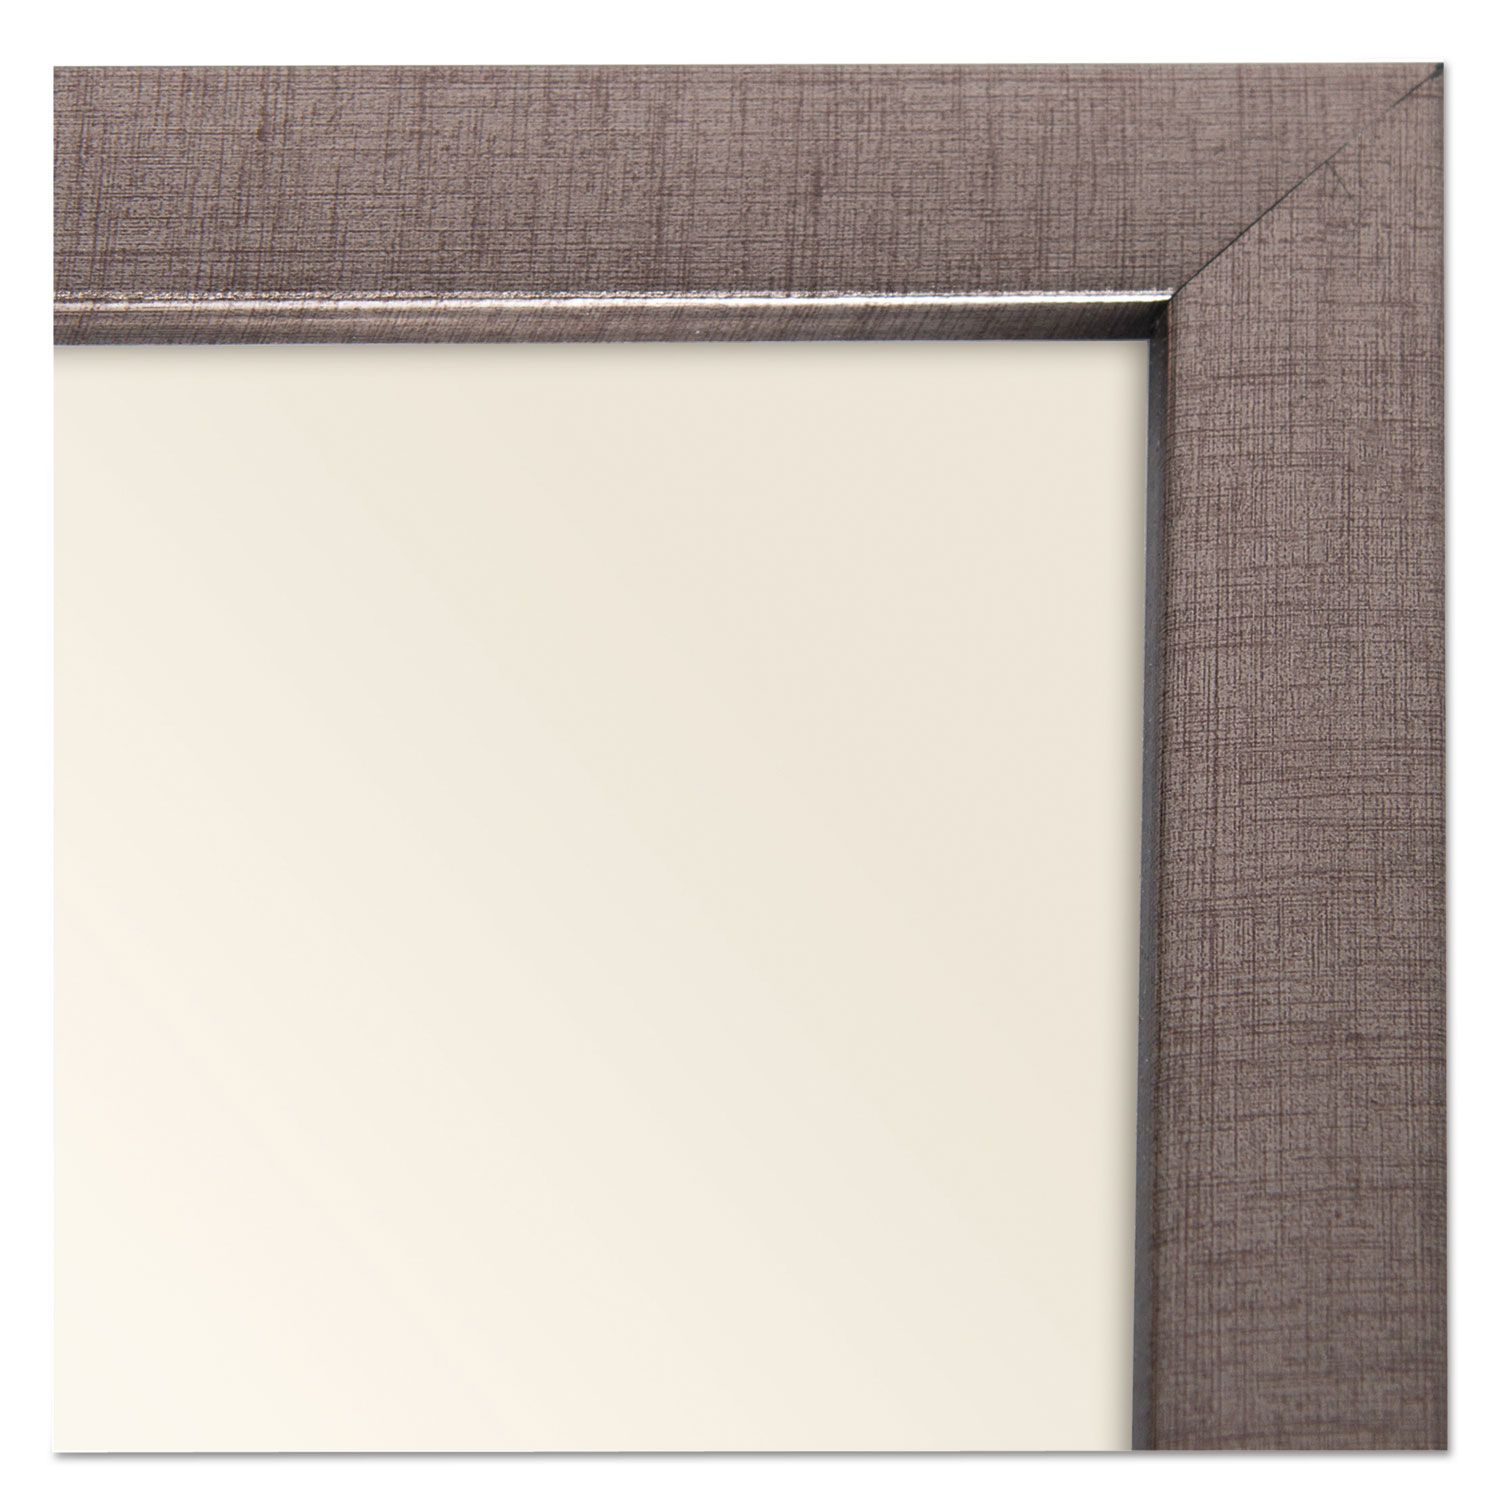 Textured Gallery Document Frame, Pewter, 11 x 14